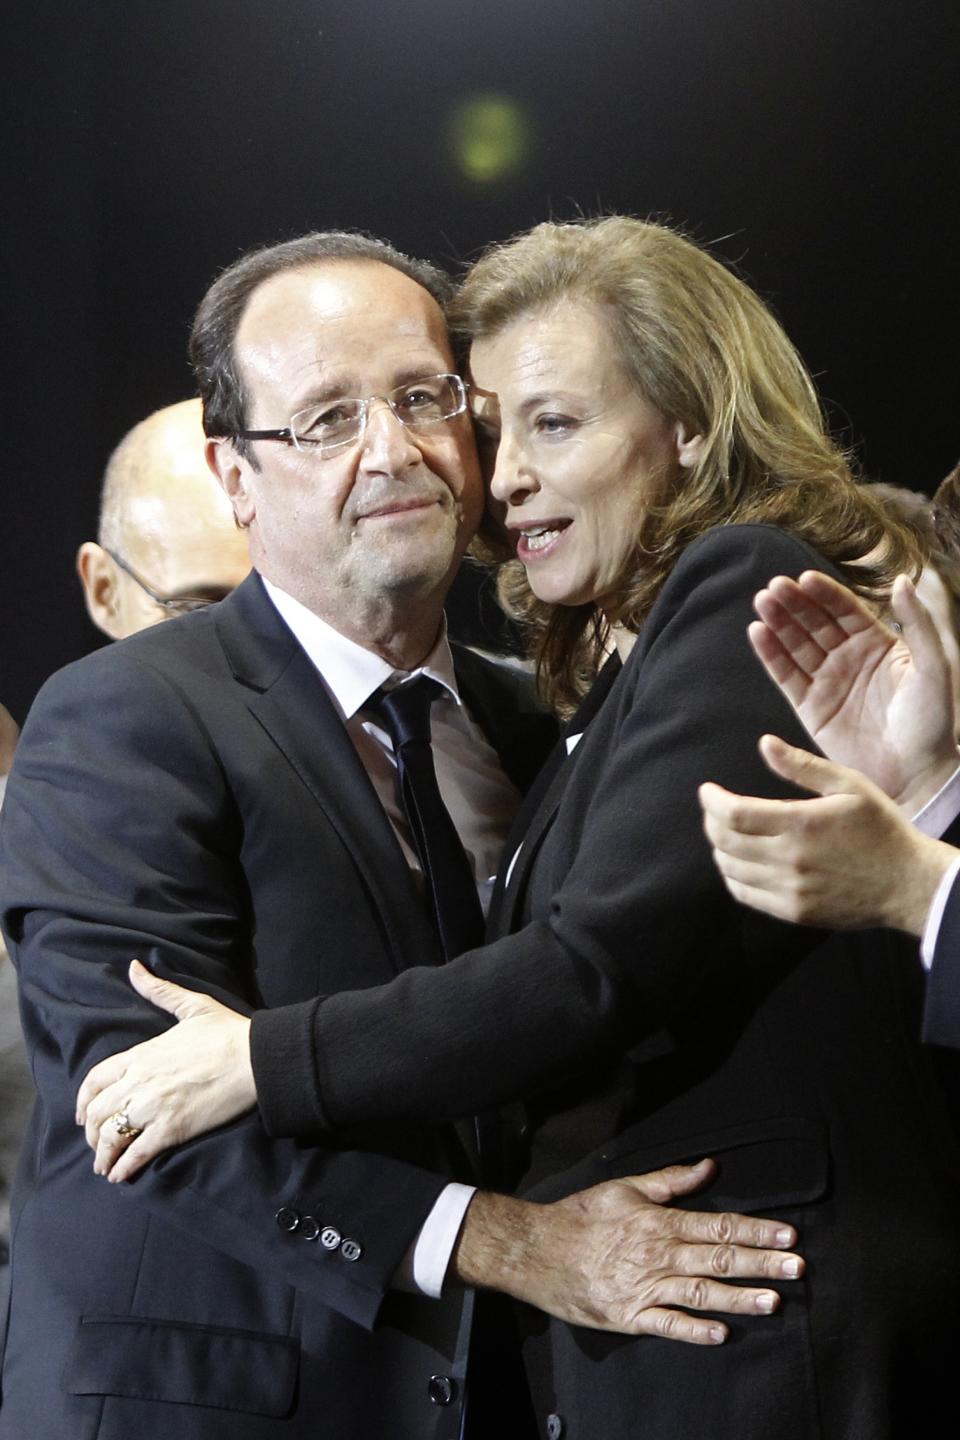 FILE - In this Sunday, May 6, 2012 file photo French president-elect Francois Hollande embraces his companion Valerie Trierweiler after greeting crowds gathered to celebrate his election victory in Bastille Square in Paris, France. A French news agency has reported that President Francois Hollande has ended his relationship with his companion of seven years Valerie Trierweiler. (AP Photo/Laurent Cipriani, File)